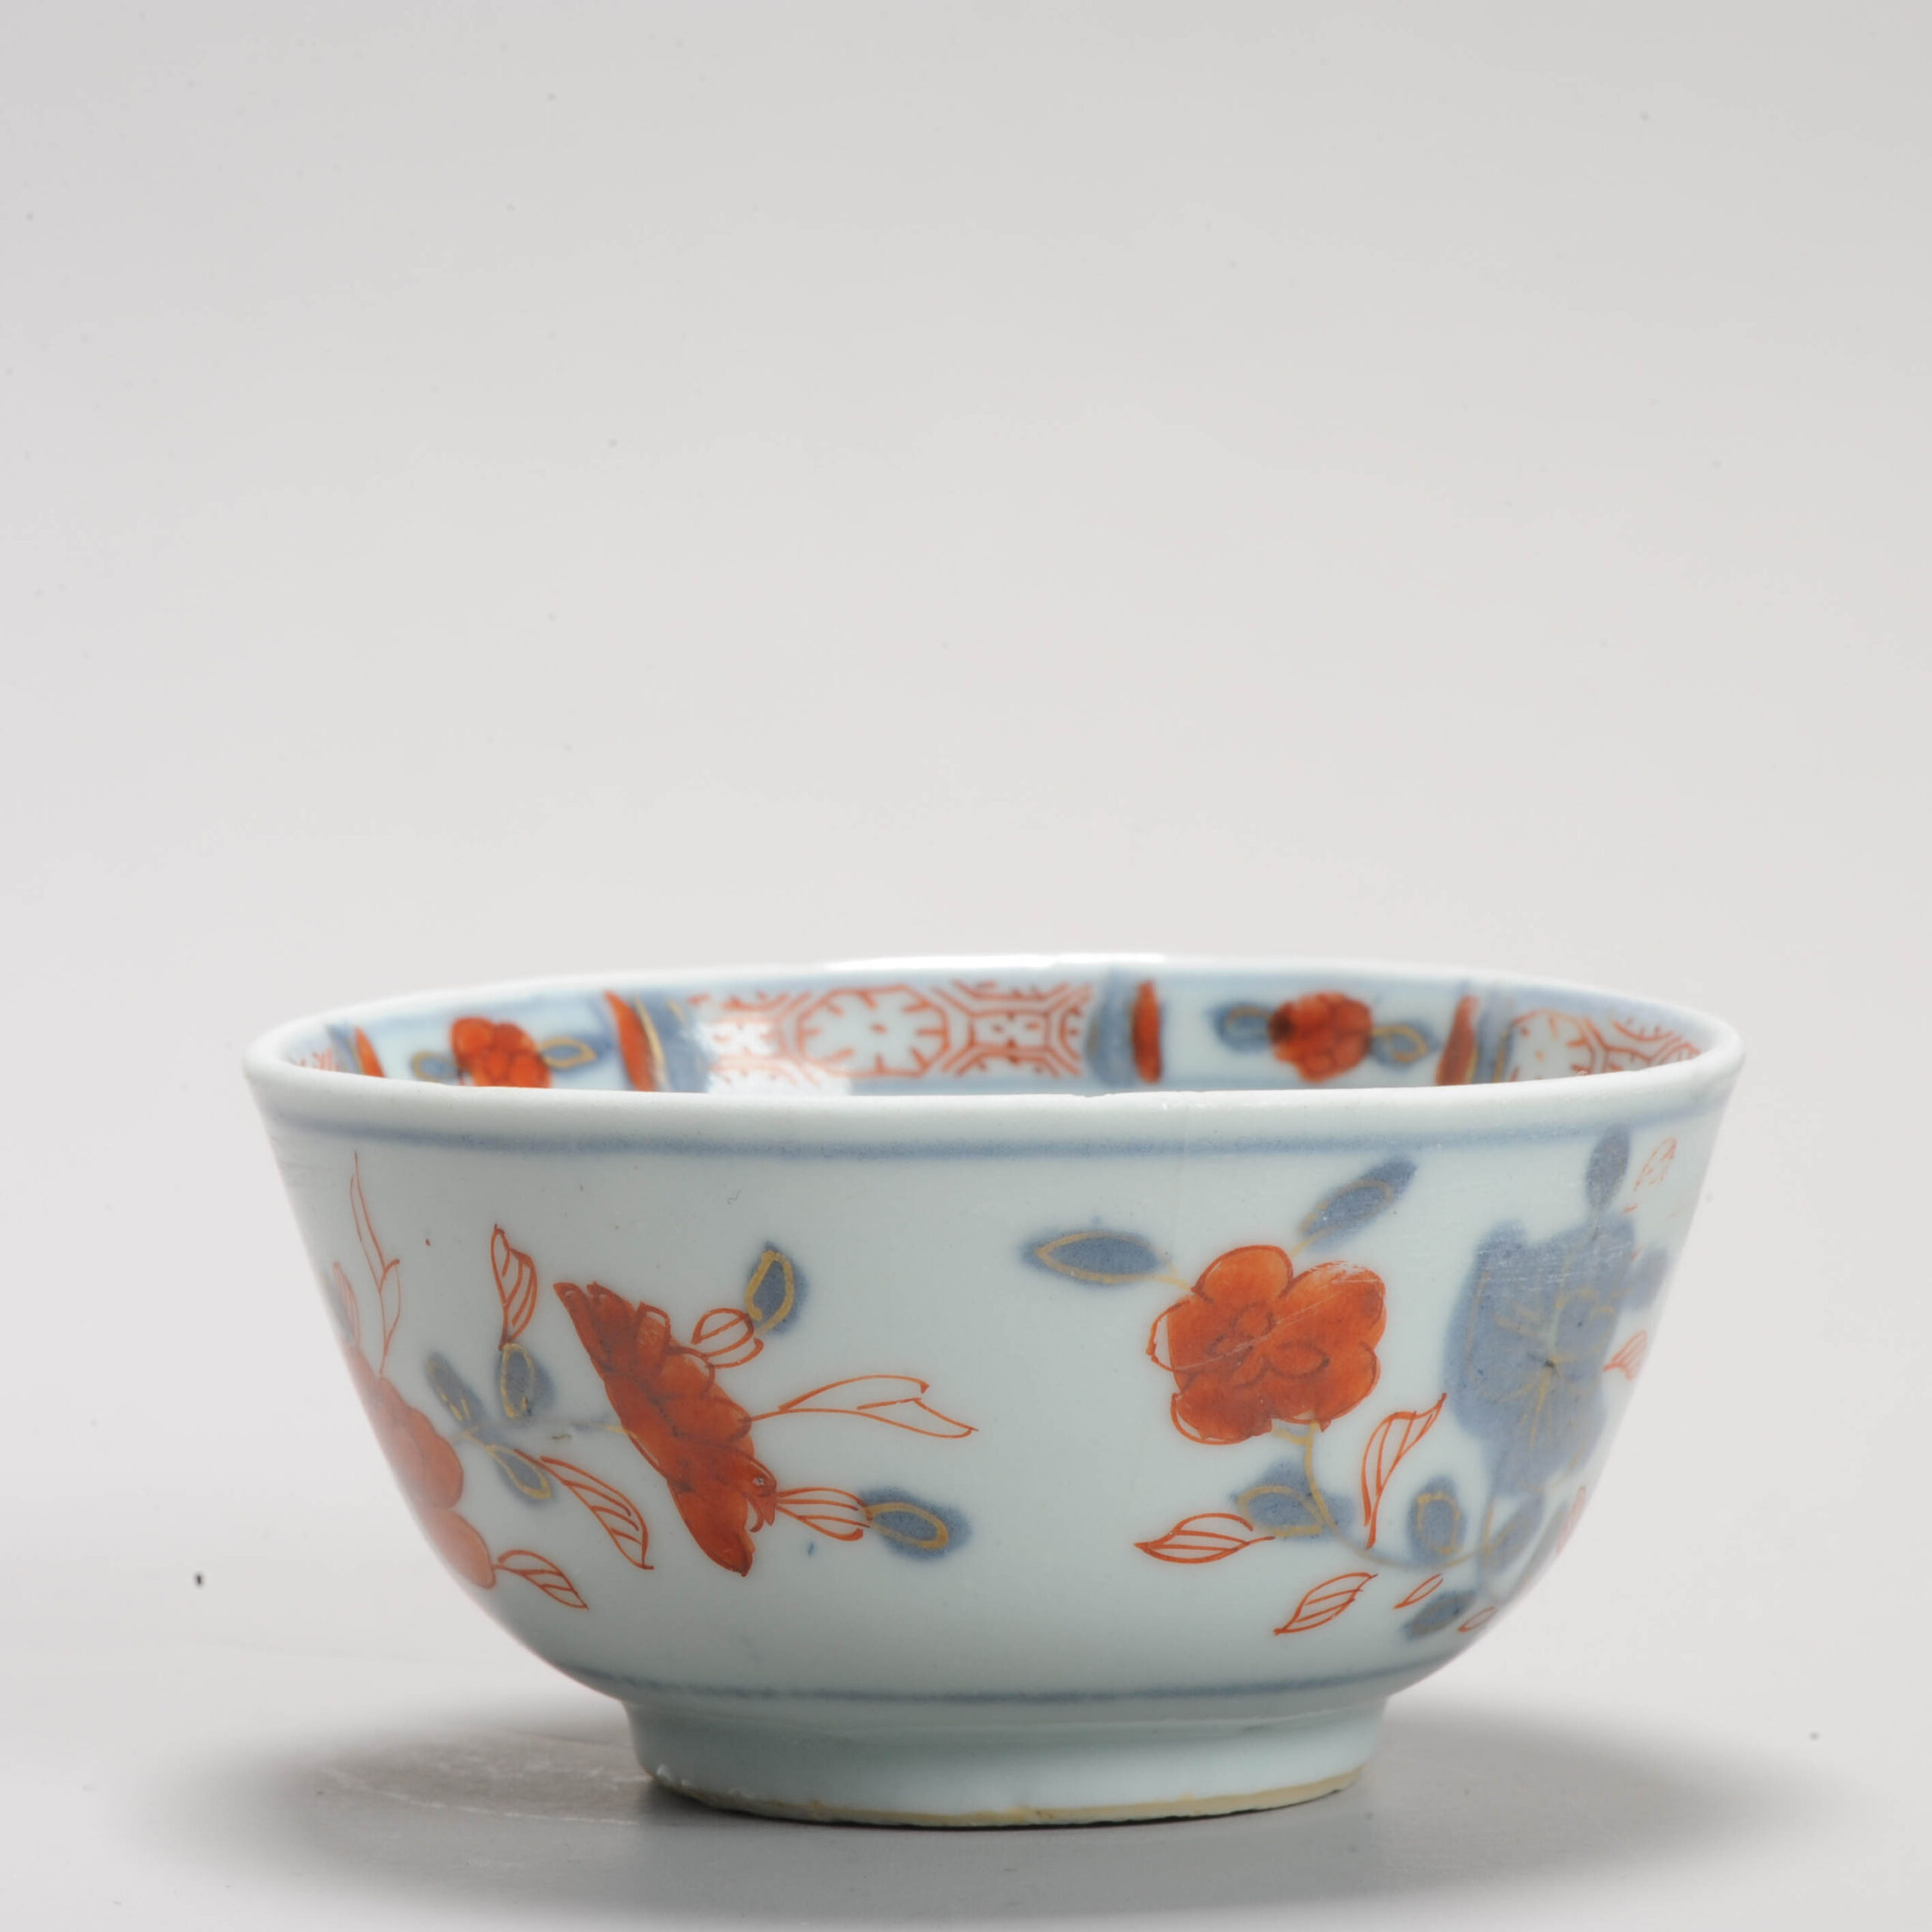 A Chinese Porcelain Imari Tea Bowl 1720-1740 Period Floral and Butterfly